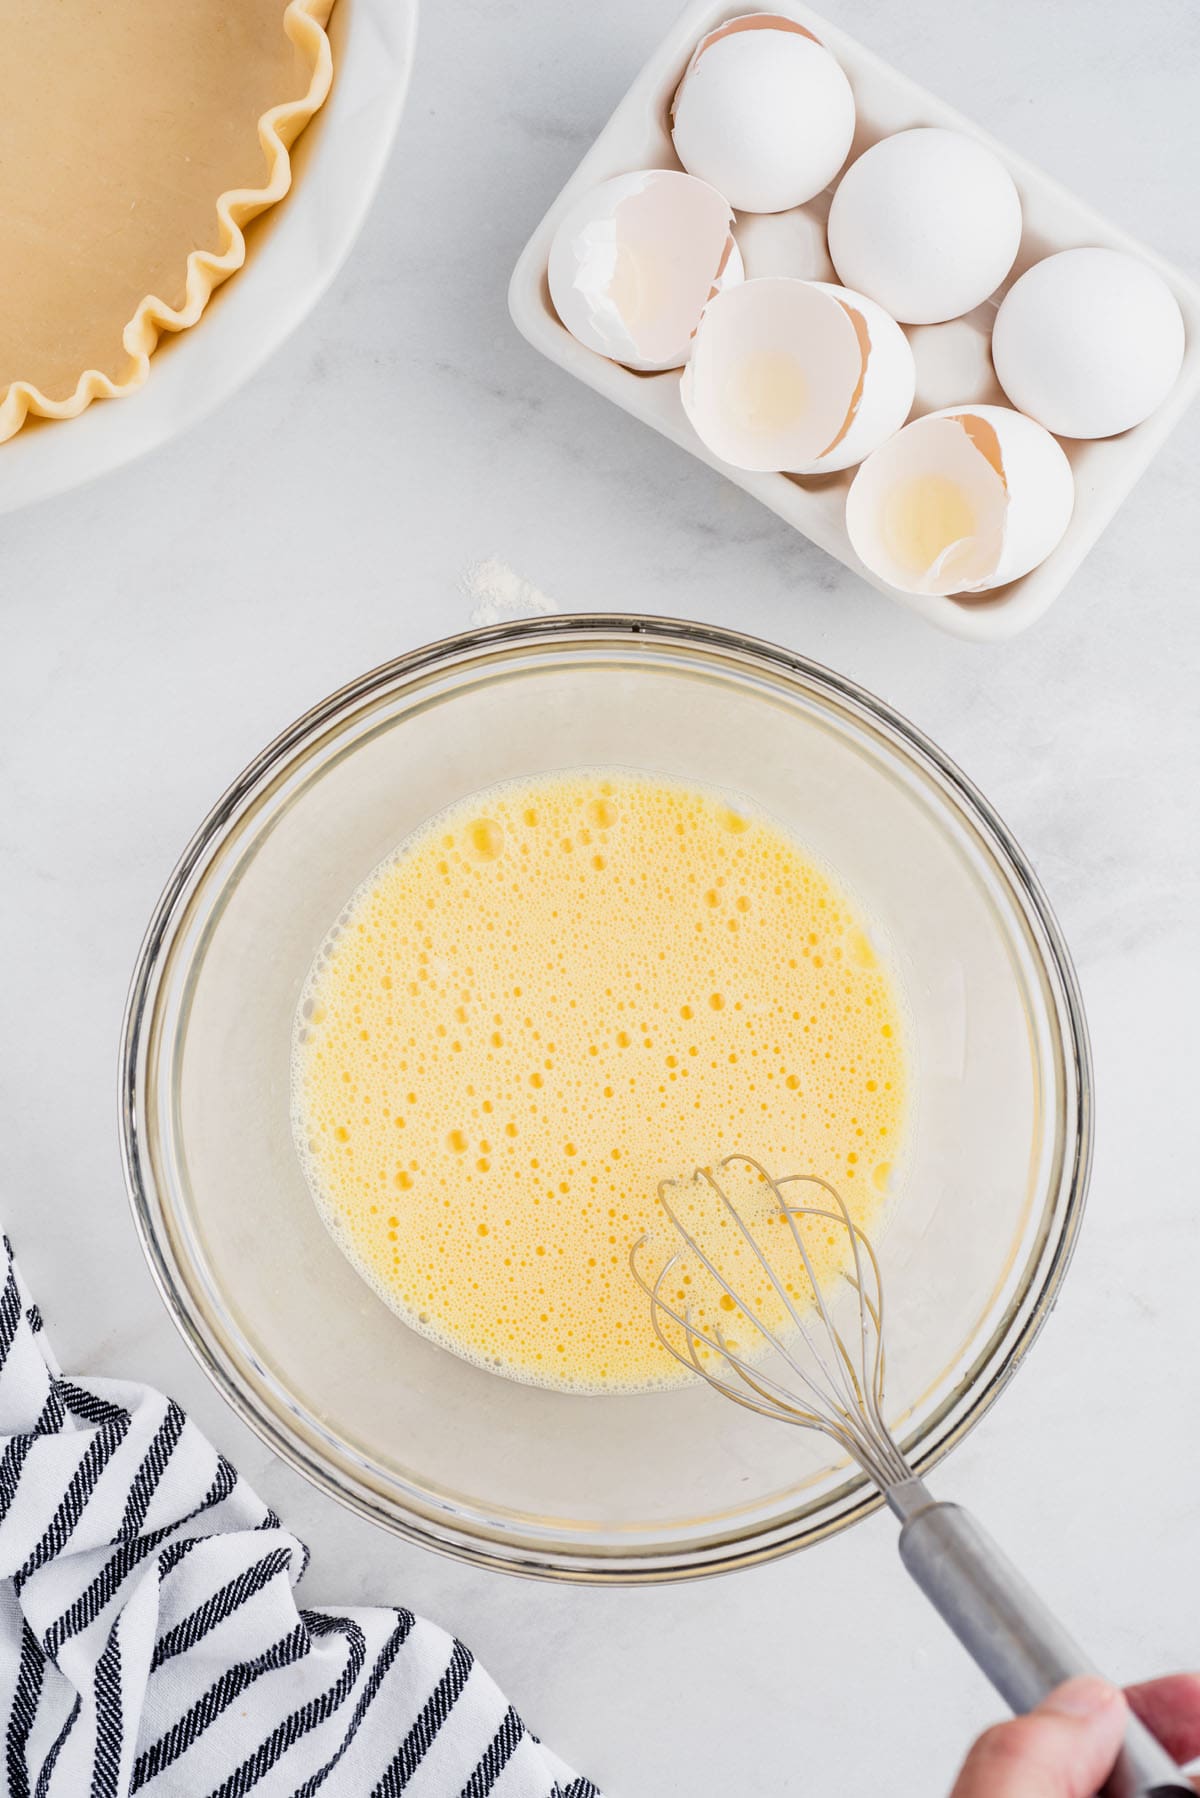 whisk eggs in a bowl